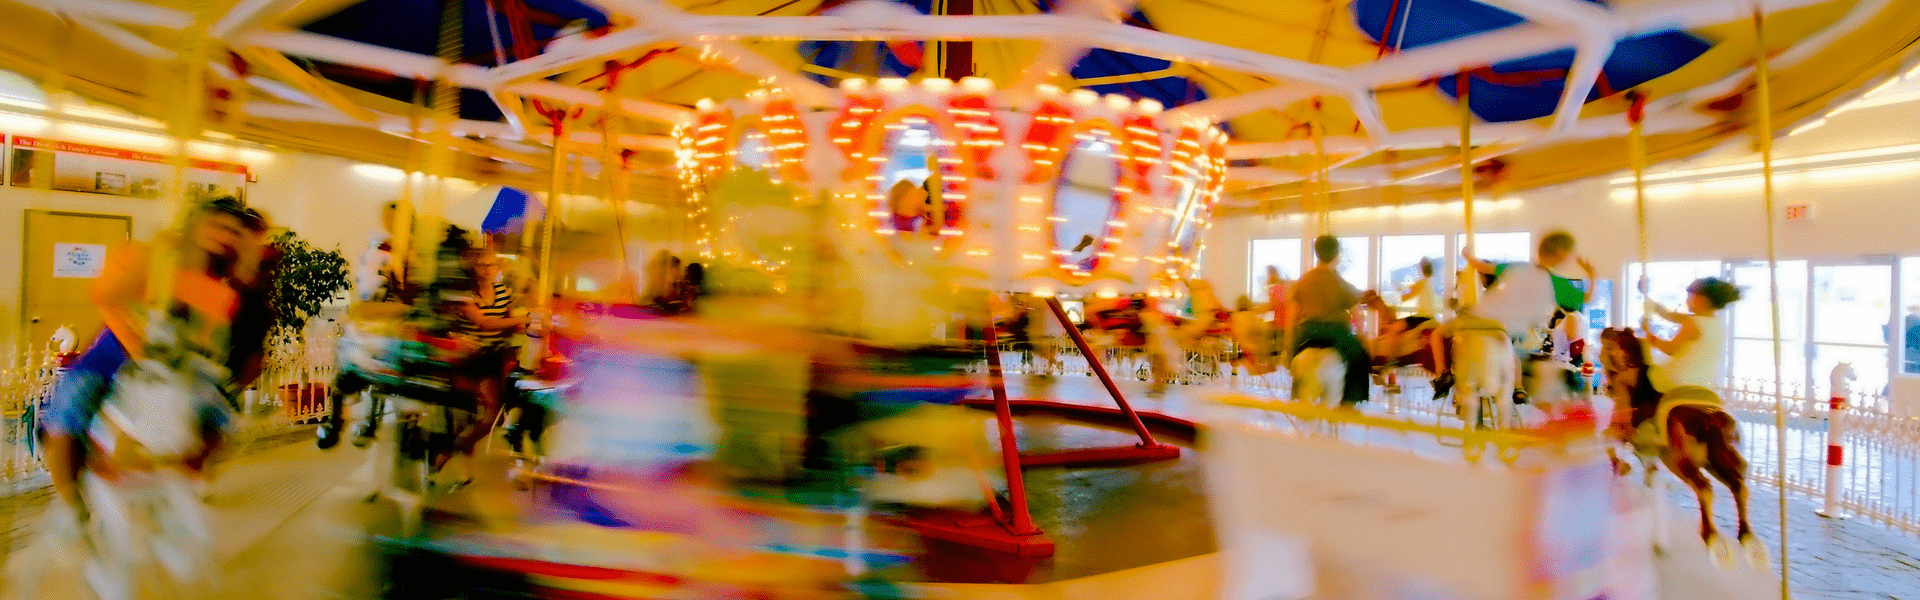 A carousel moving fast casing the image to blur